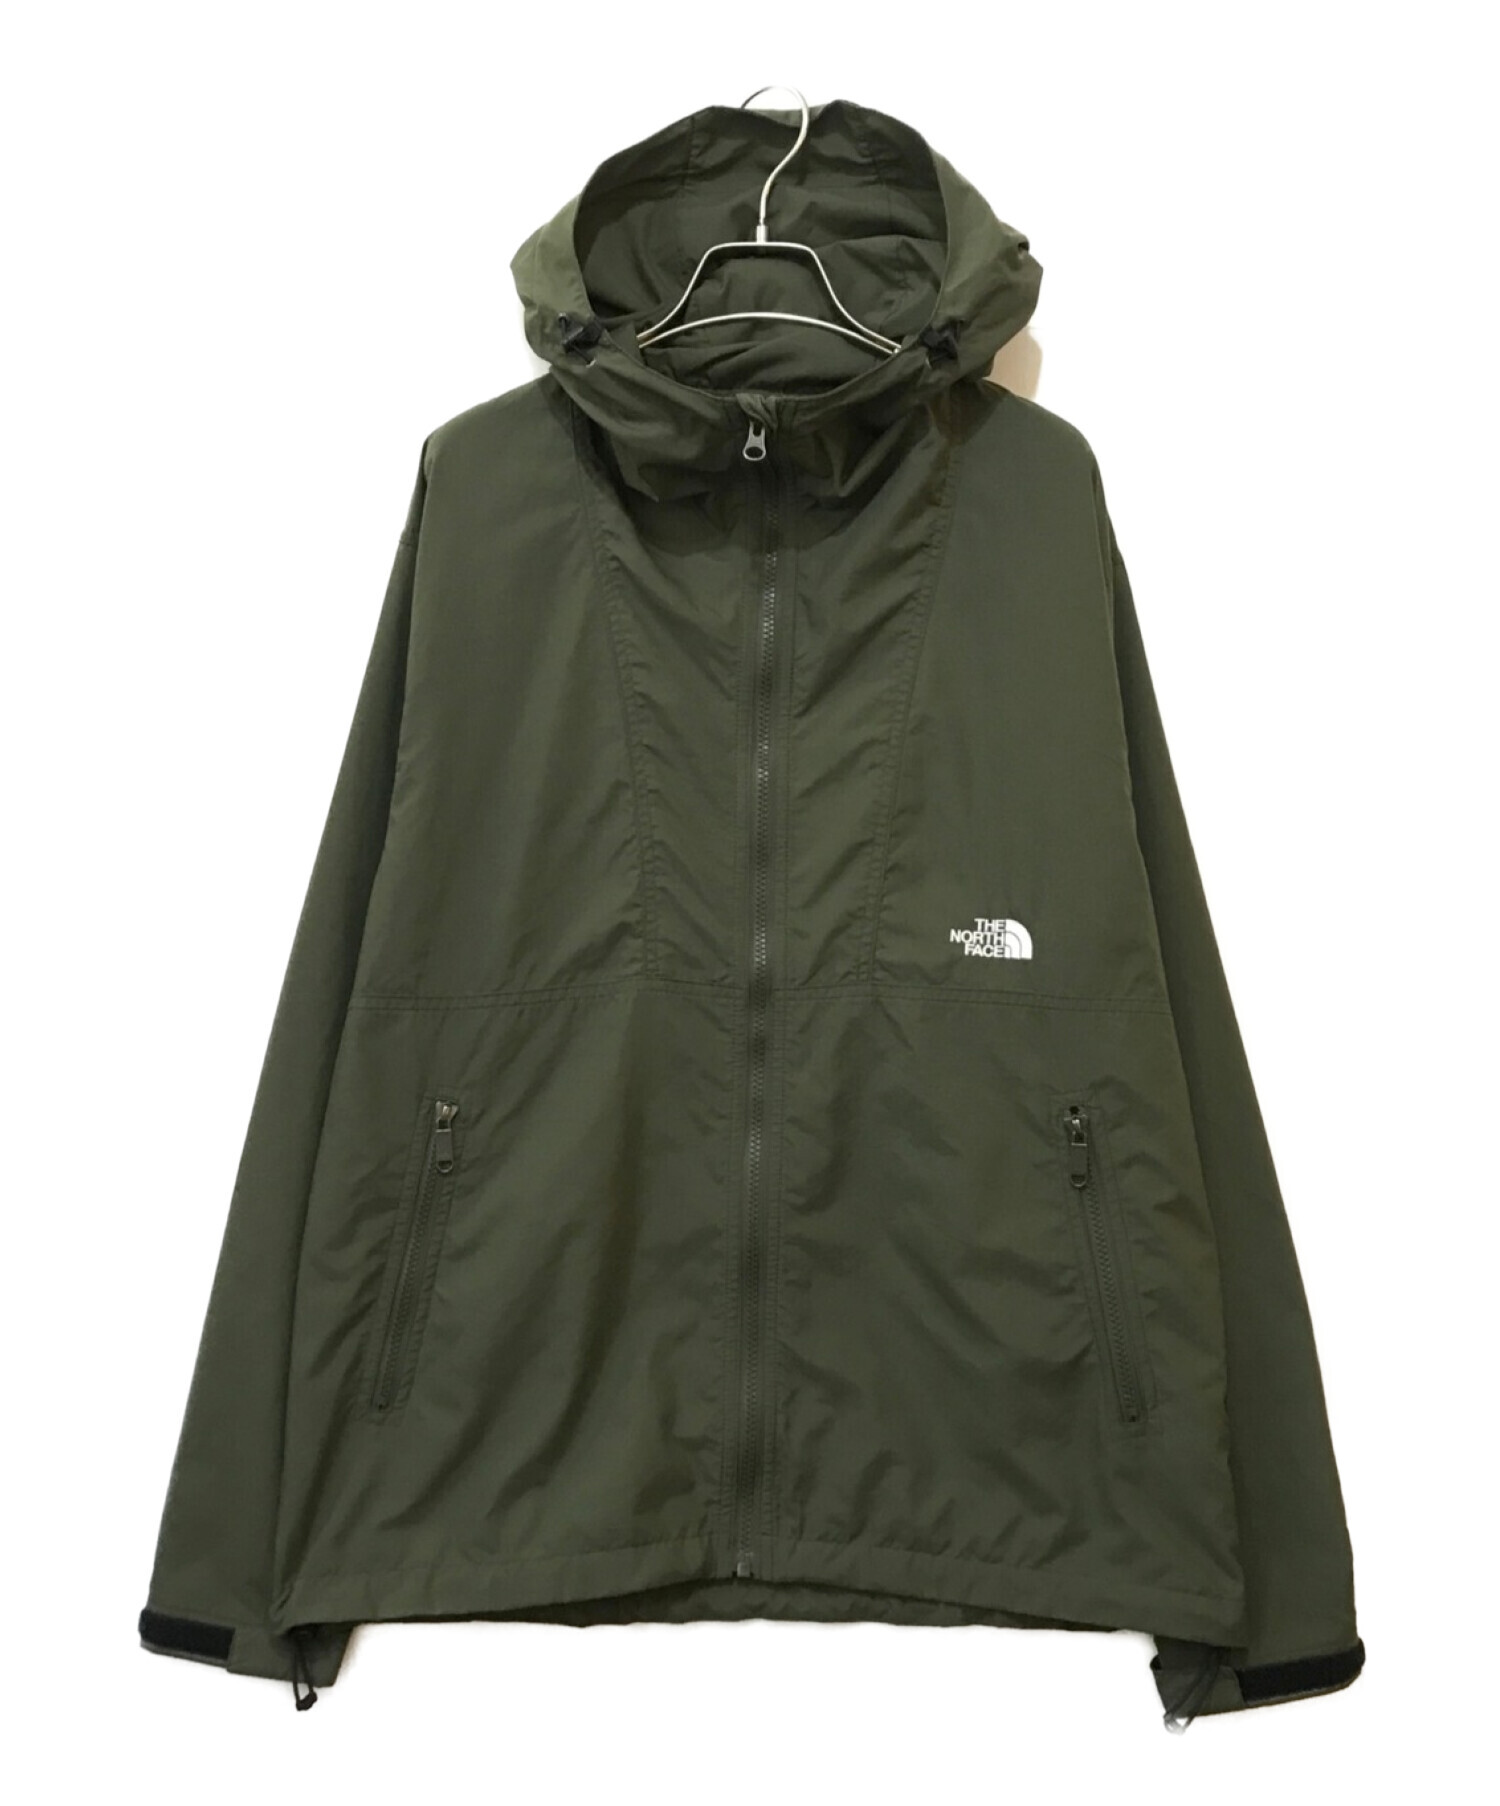 39THE NORTH FACE  コンパクトジャケット カーキ M